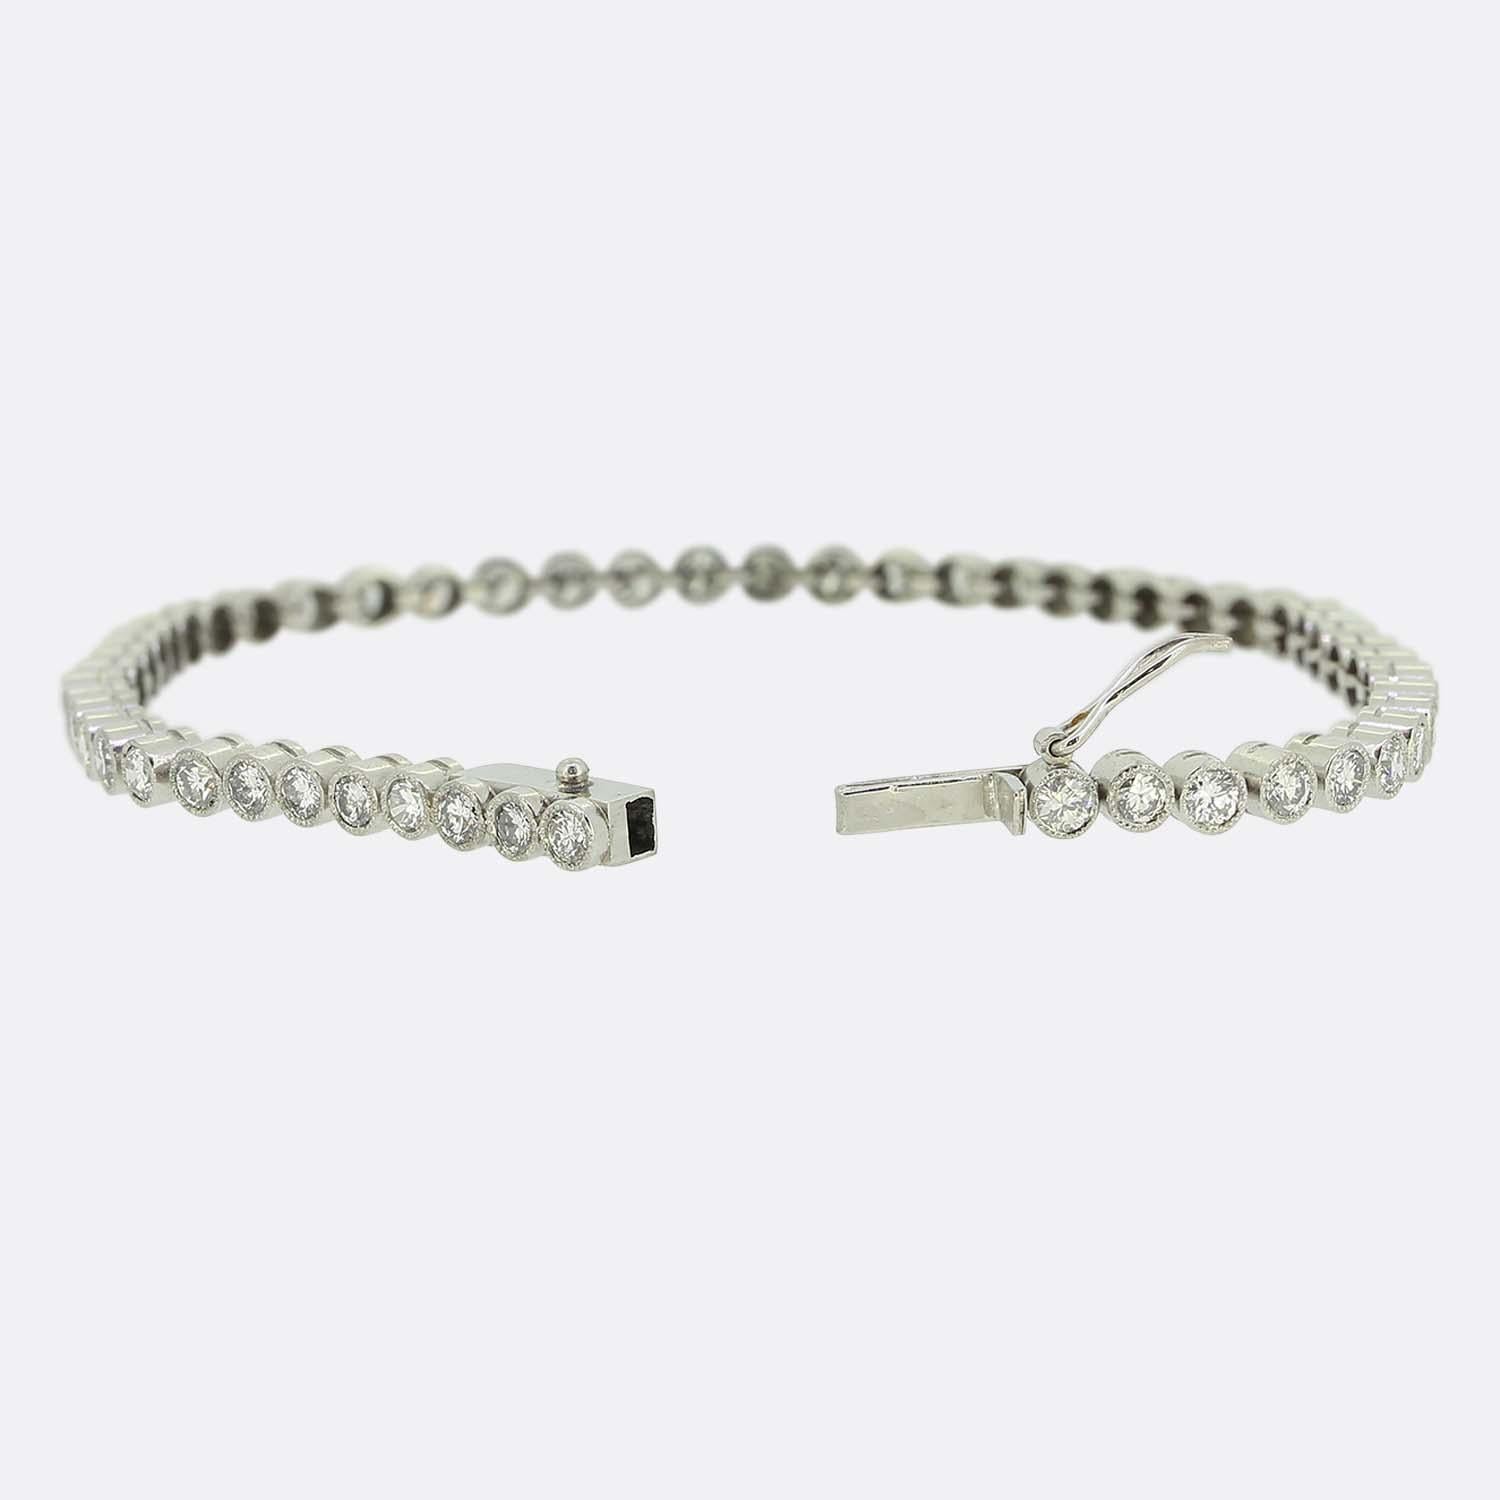 Here we have a charming diamond line bracelet. This vintage piece has been crafted from platinum and features 49 round brilliant cut diamonds in a single line formation. Each bright white stone is well matched in terms of colour, size and presence